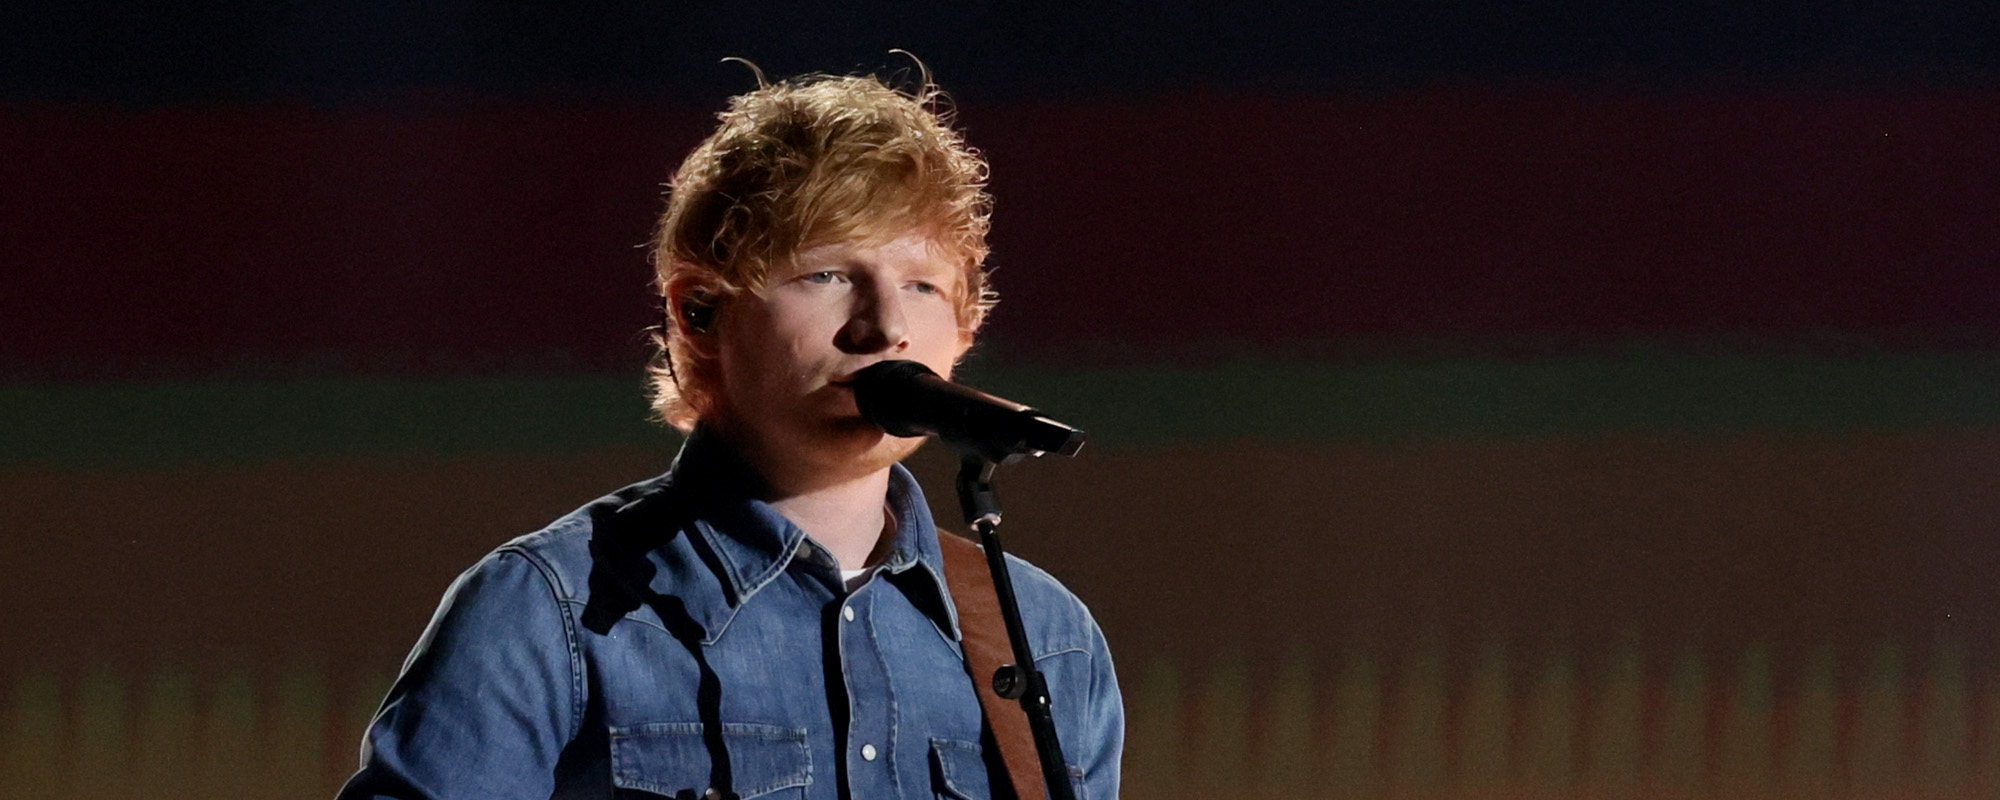 Ed Sheeran Faces More Copyright Infringement Claims Over “Thinking Out Loud”